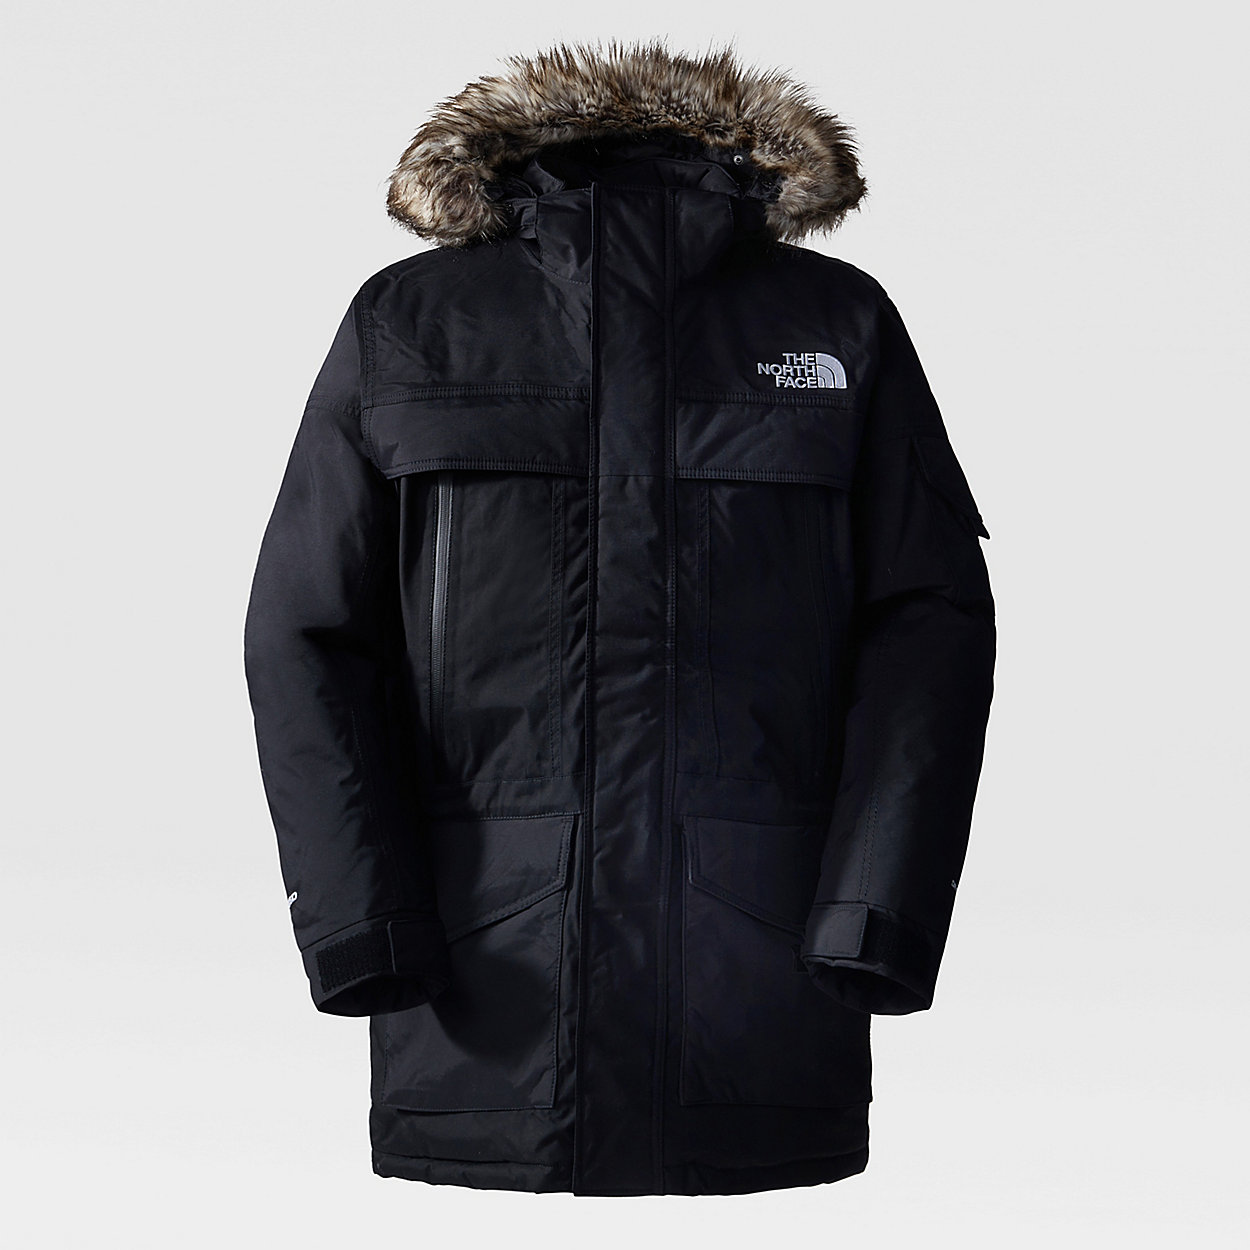 Unlock Wilderness' choice in the Trespass Vs North Face comparison, the McMurdo 2 Parka by The North Face